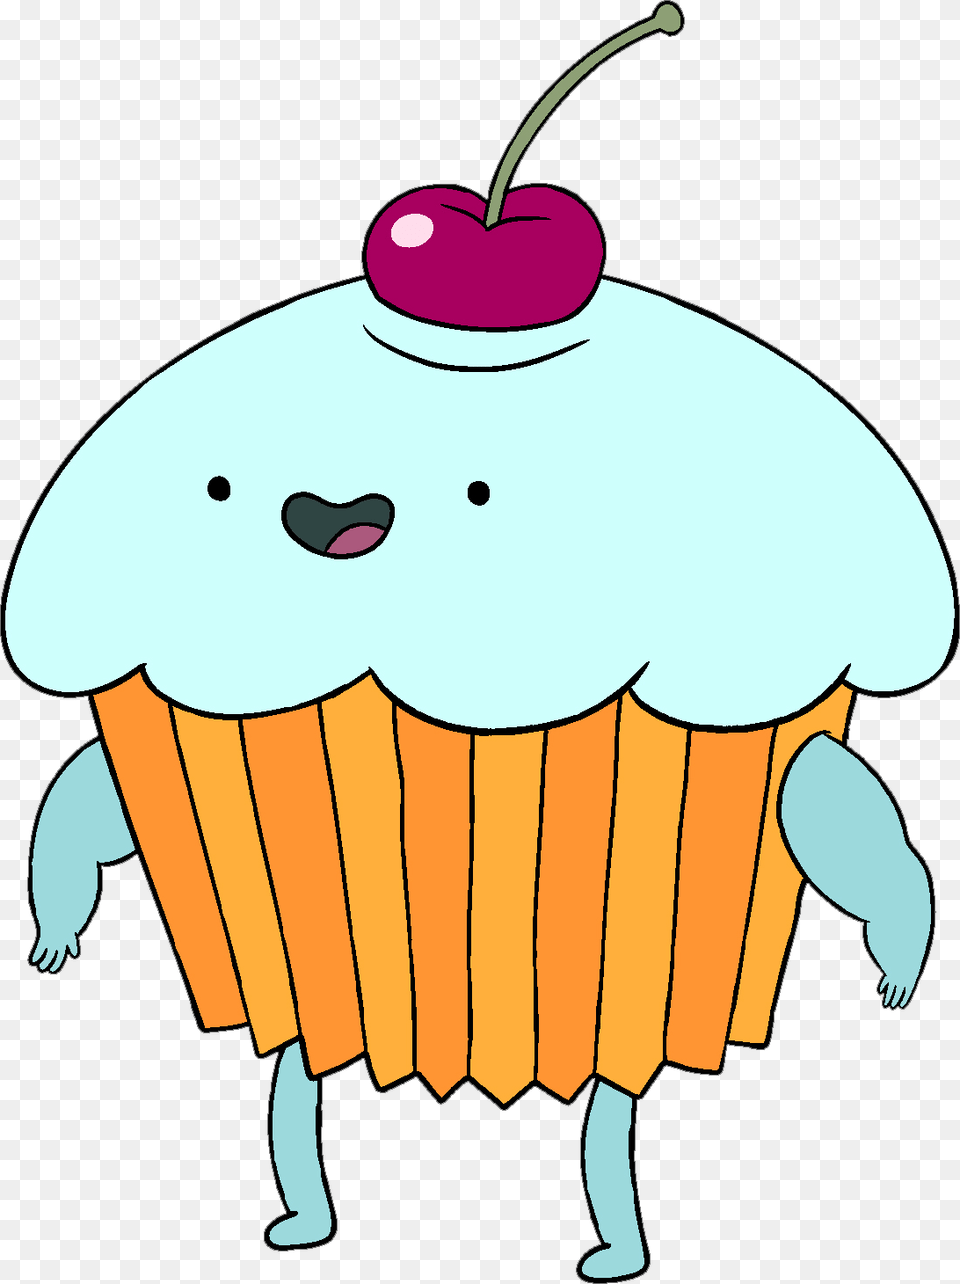 Adventure Time Cupcake With Cherry On Top, Food, Cake, Cream, Dessert Png